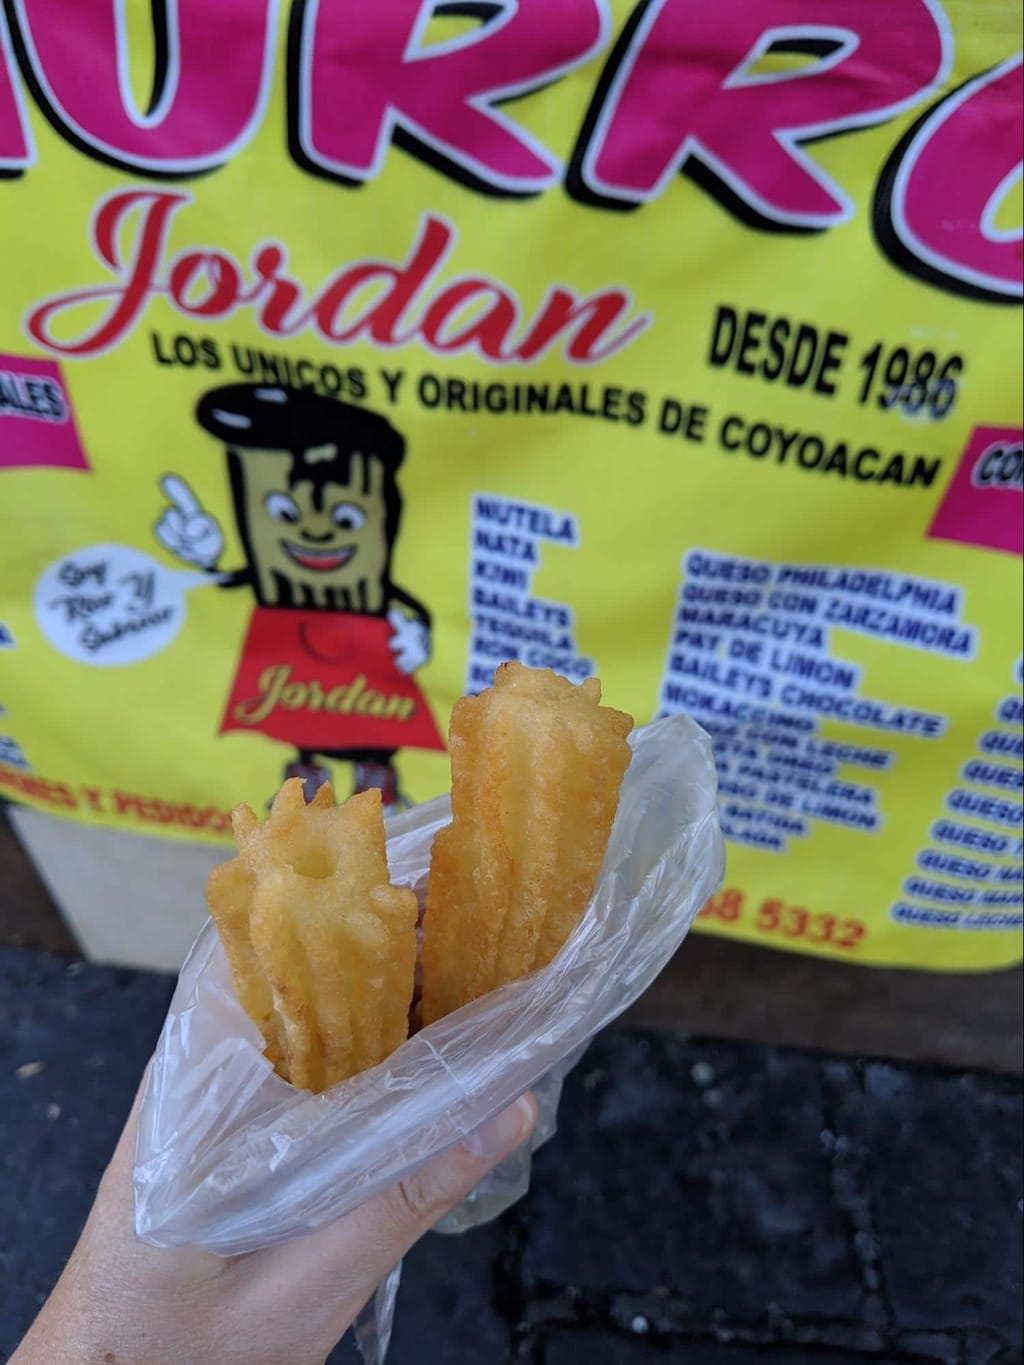 Churros to go from Coyoacan - Mexicans do not eat churros as dessert